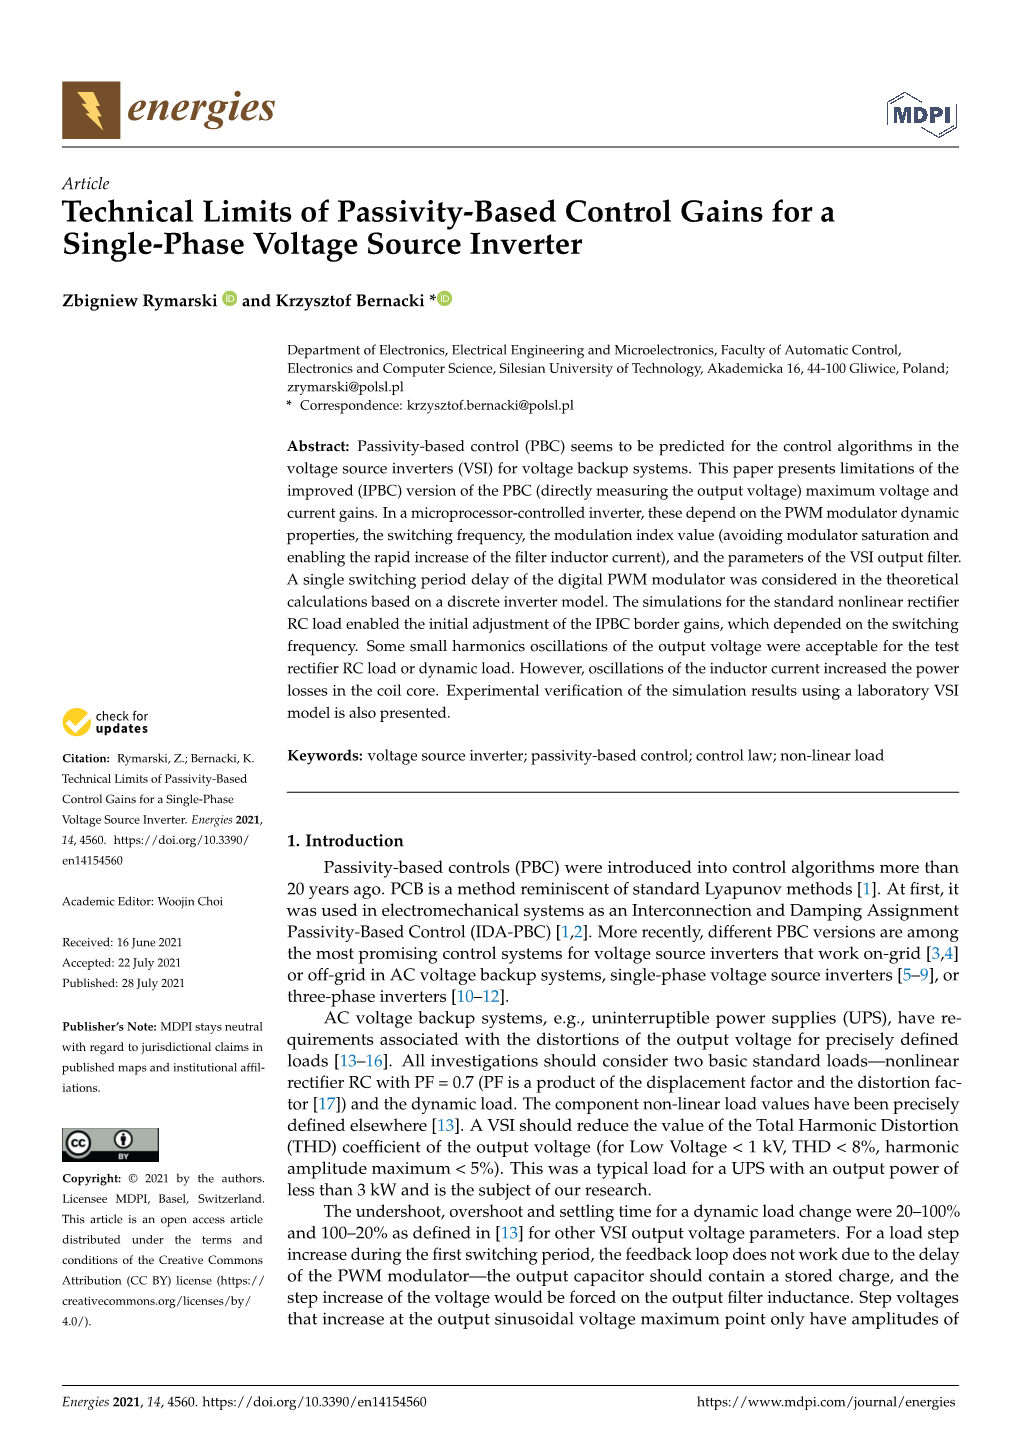 Technical Limits of Passivity-Based Control Gains for a Single-Phase Voltage Source Inverter